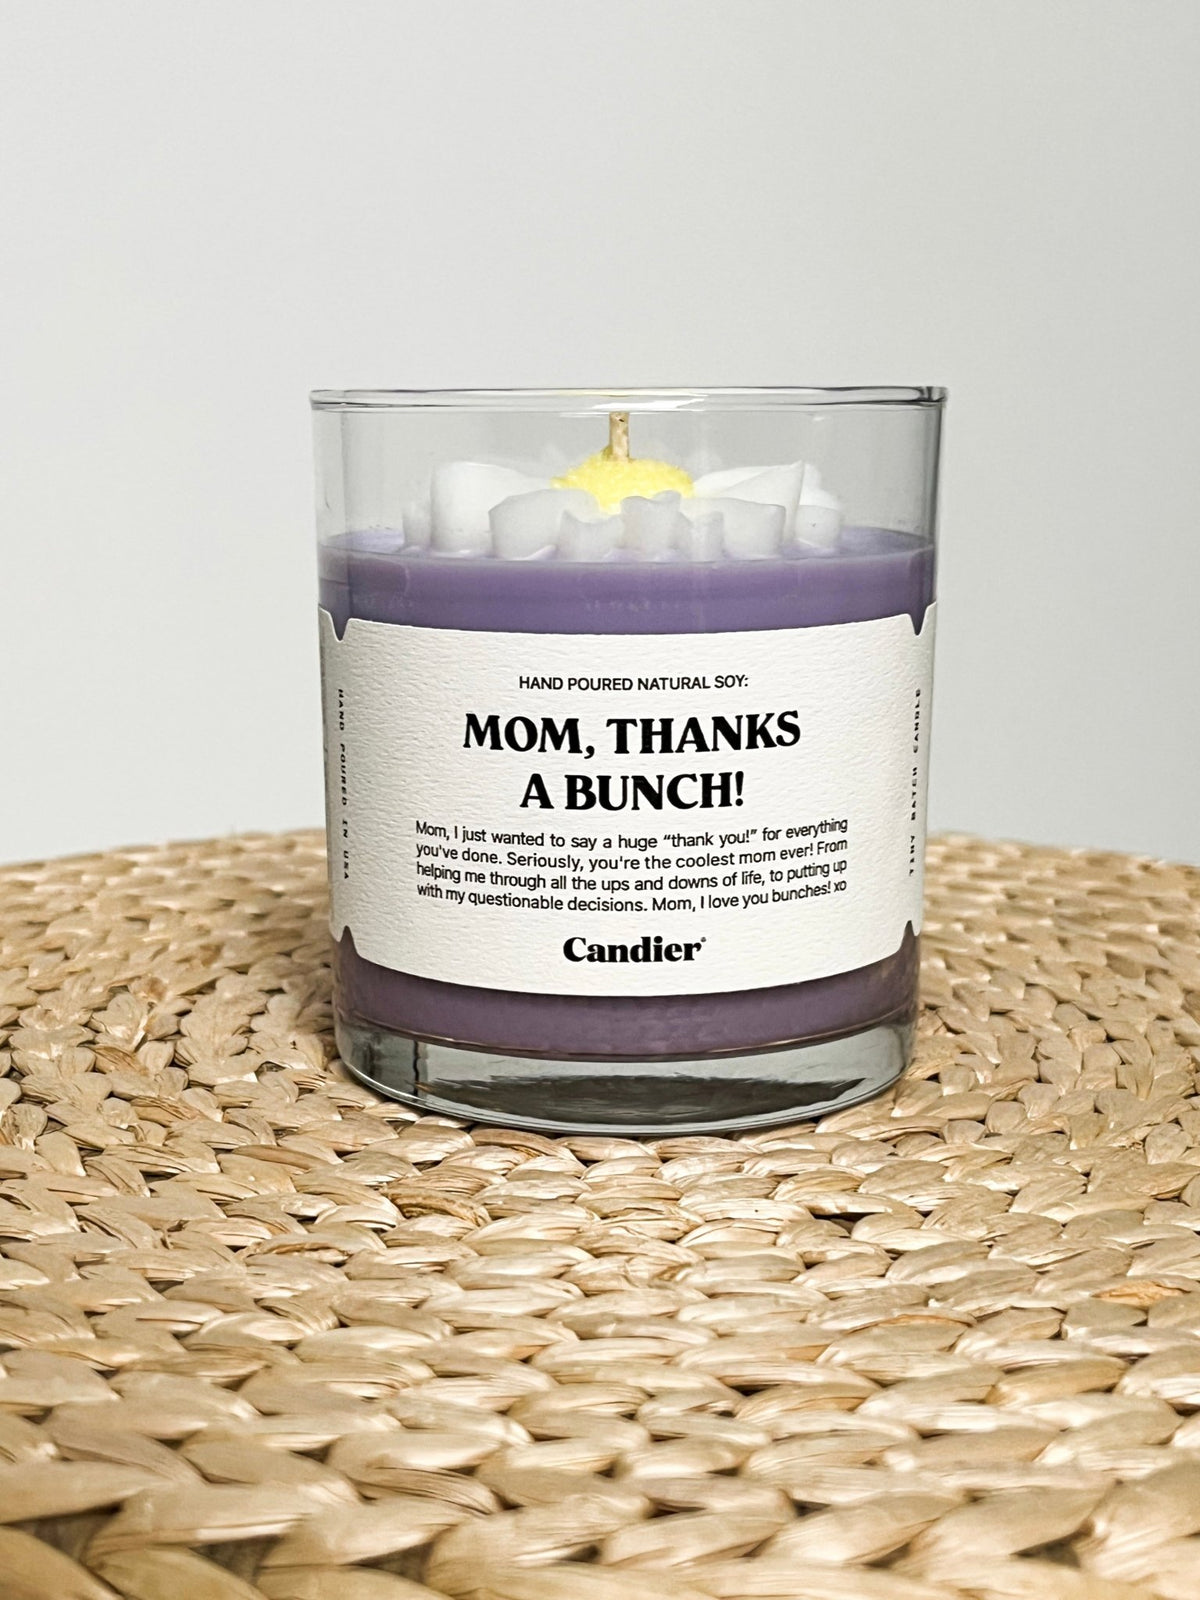 Mom thanks a bunch candle 9 oz - Stylish candle - Trendy Gifts for Mom at Lush Fashion Lounge in Oklahoma